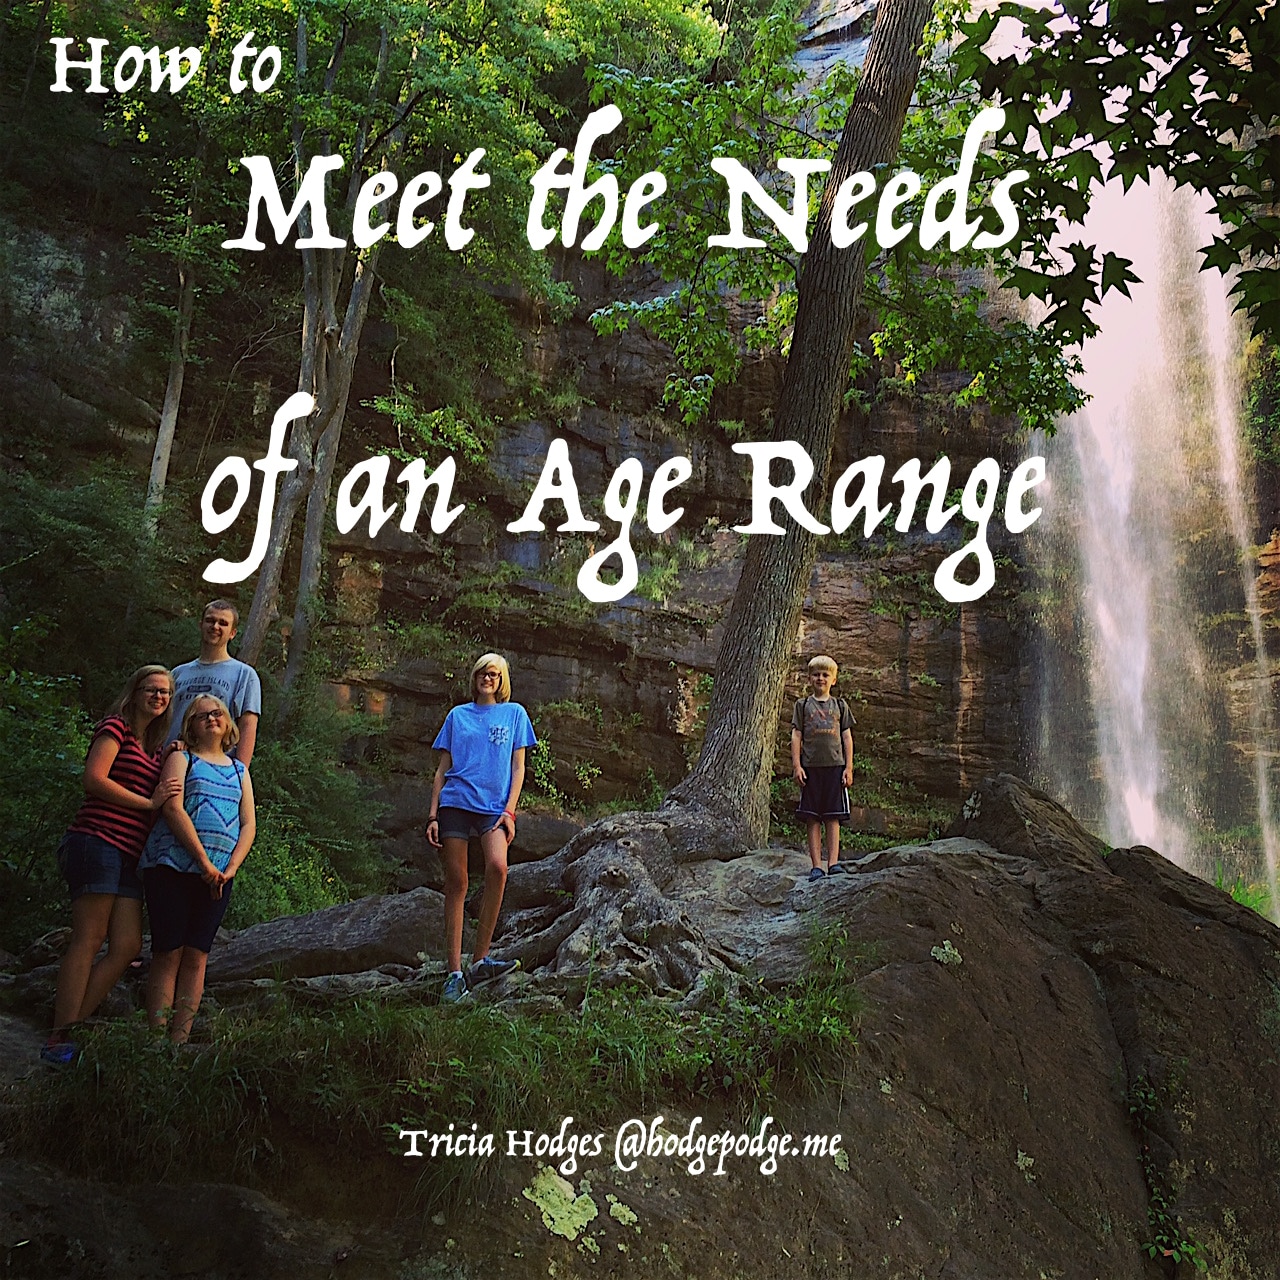 How to Meet The Needs of an Age Range